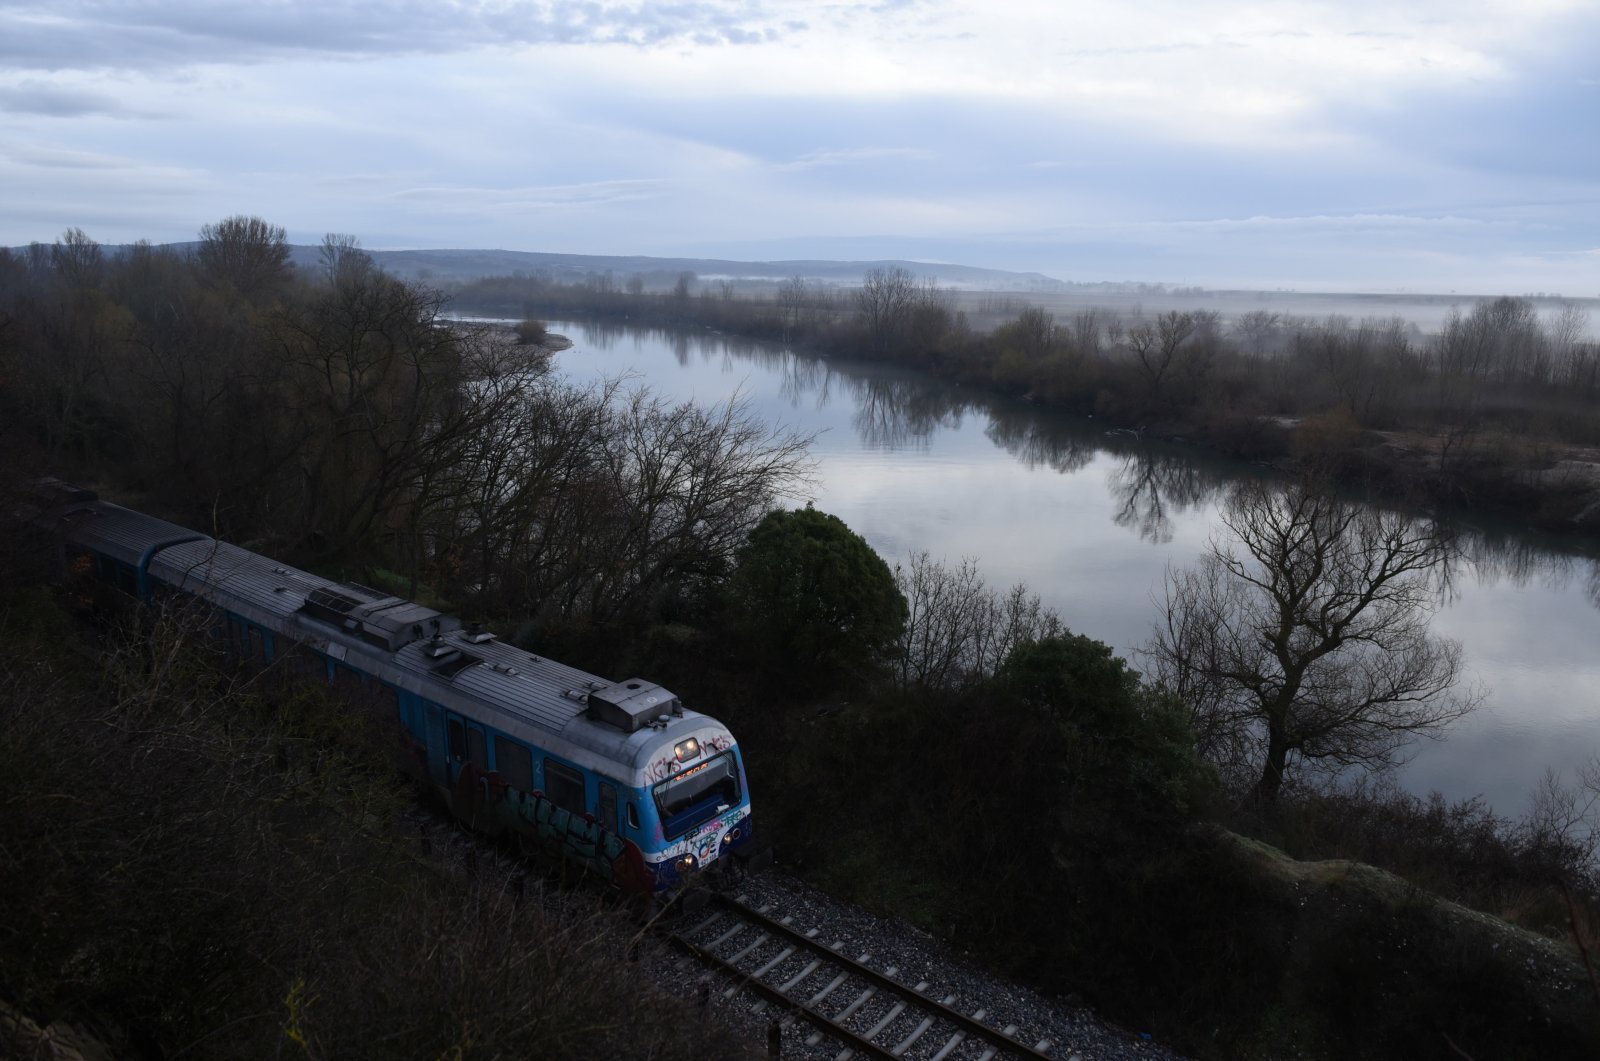 A train passes next to the Evros river, the natural border between Greece and Turkey, near the city of Didymoteicho, in the region of Evros, Greece, March 5, 2020. (Reuters File Photo)